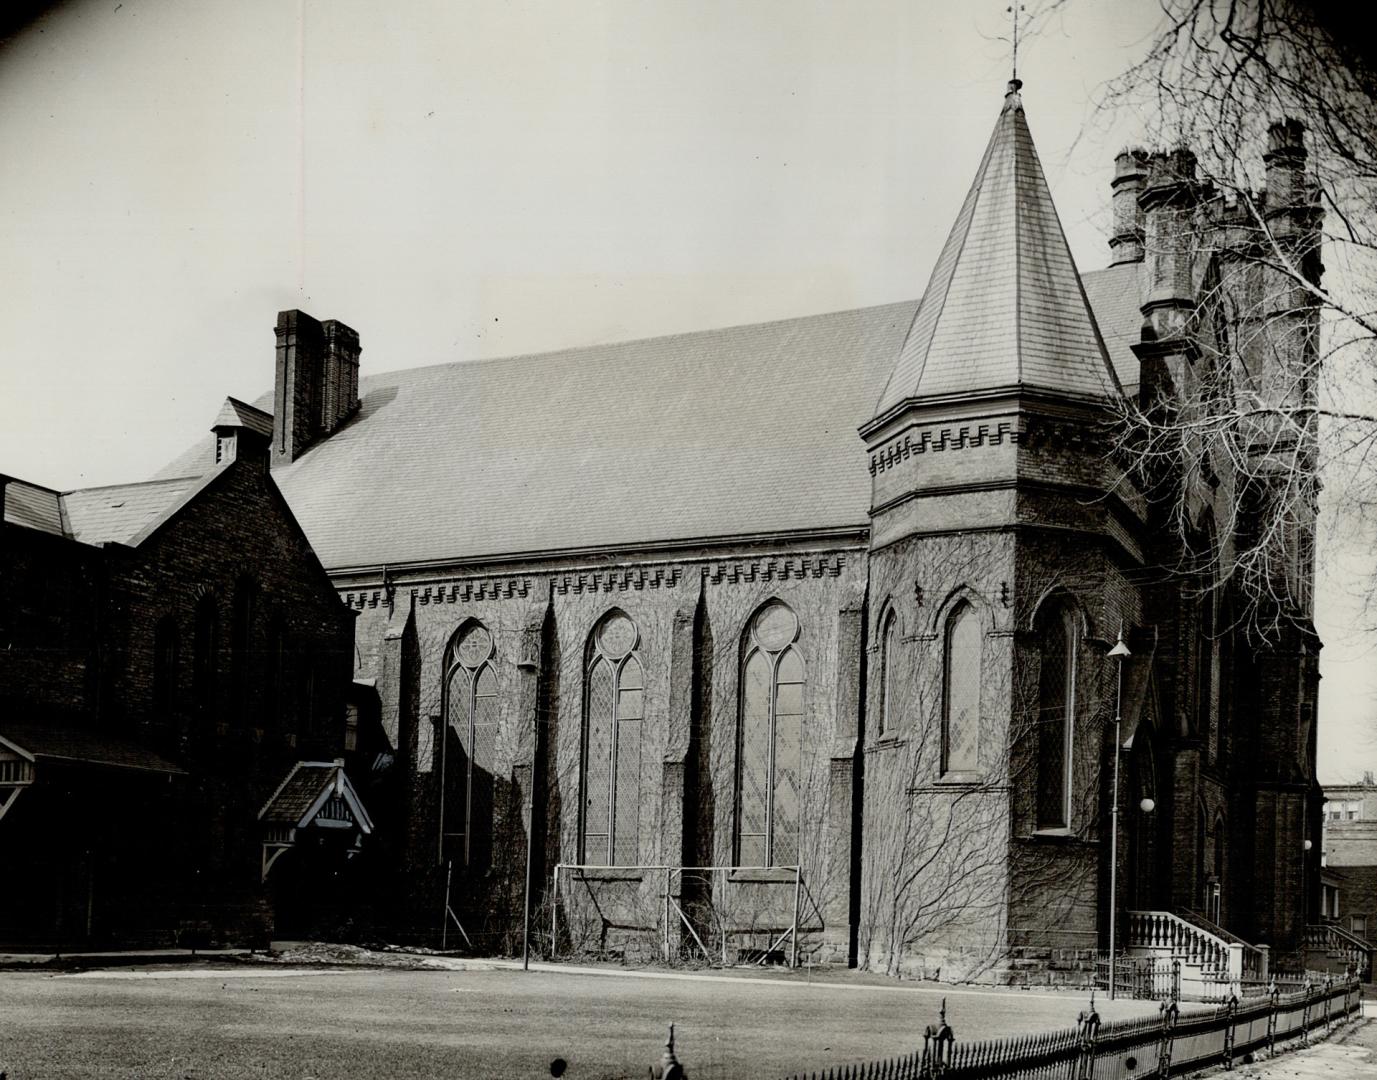 Side view of exterior of church showing arched windows, steeply pitched roof and attached tower ...